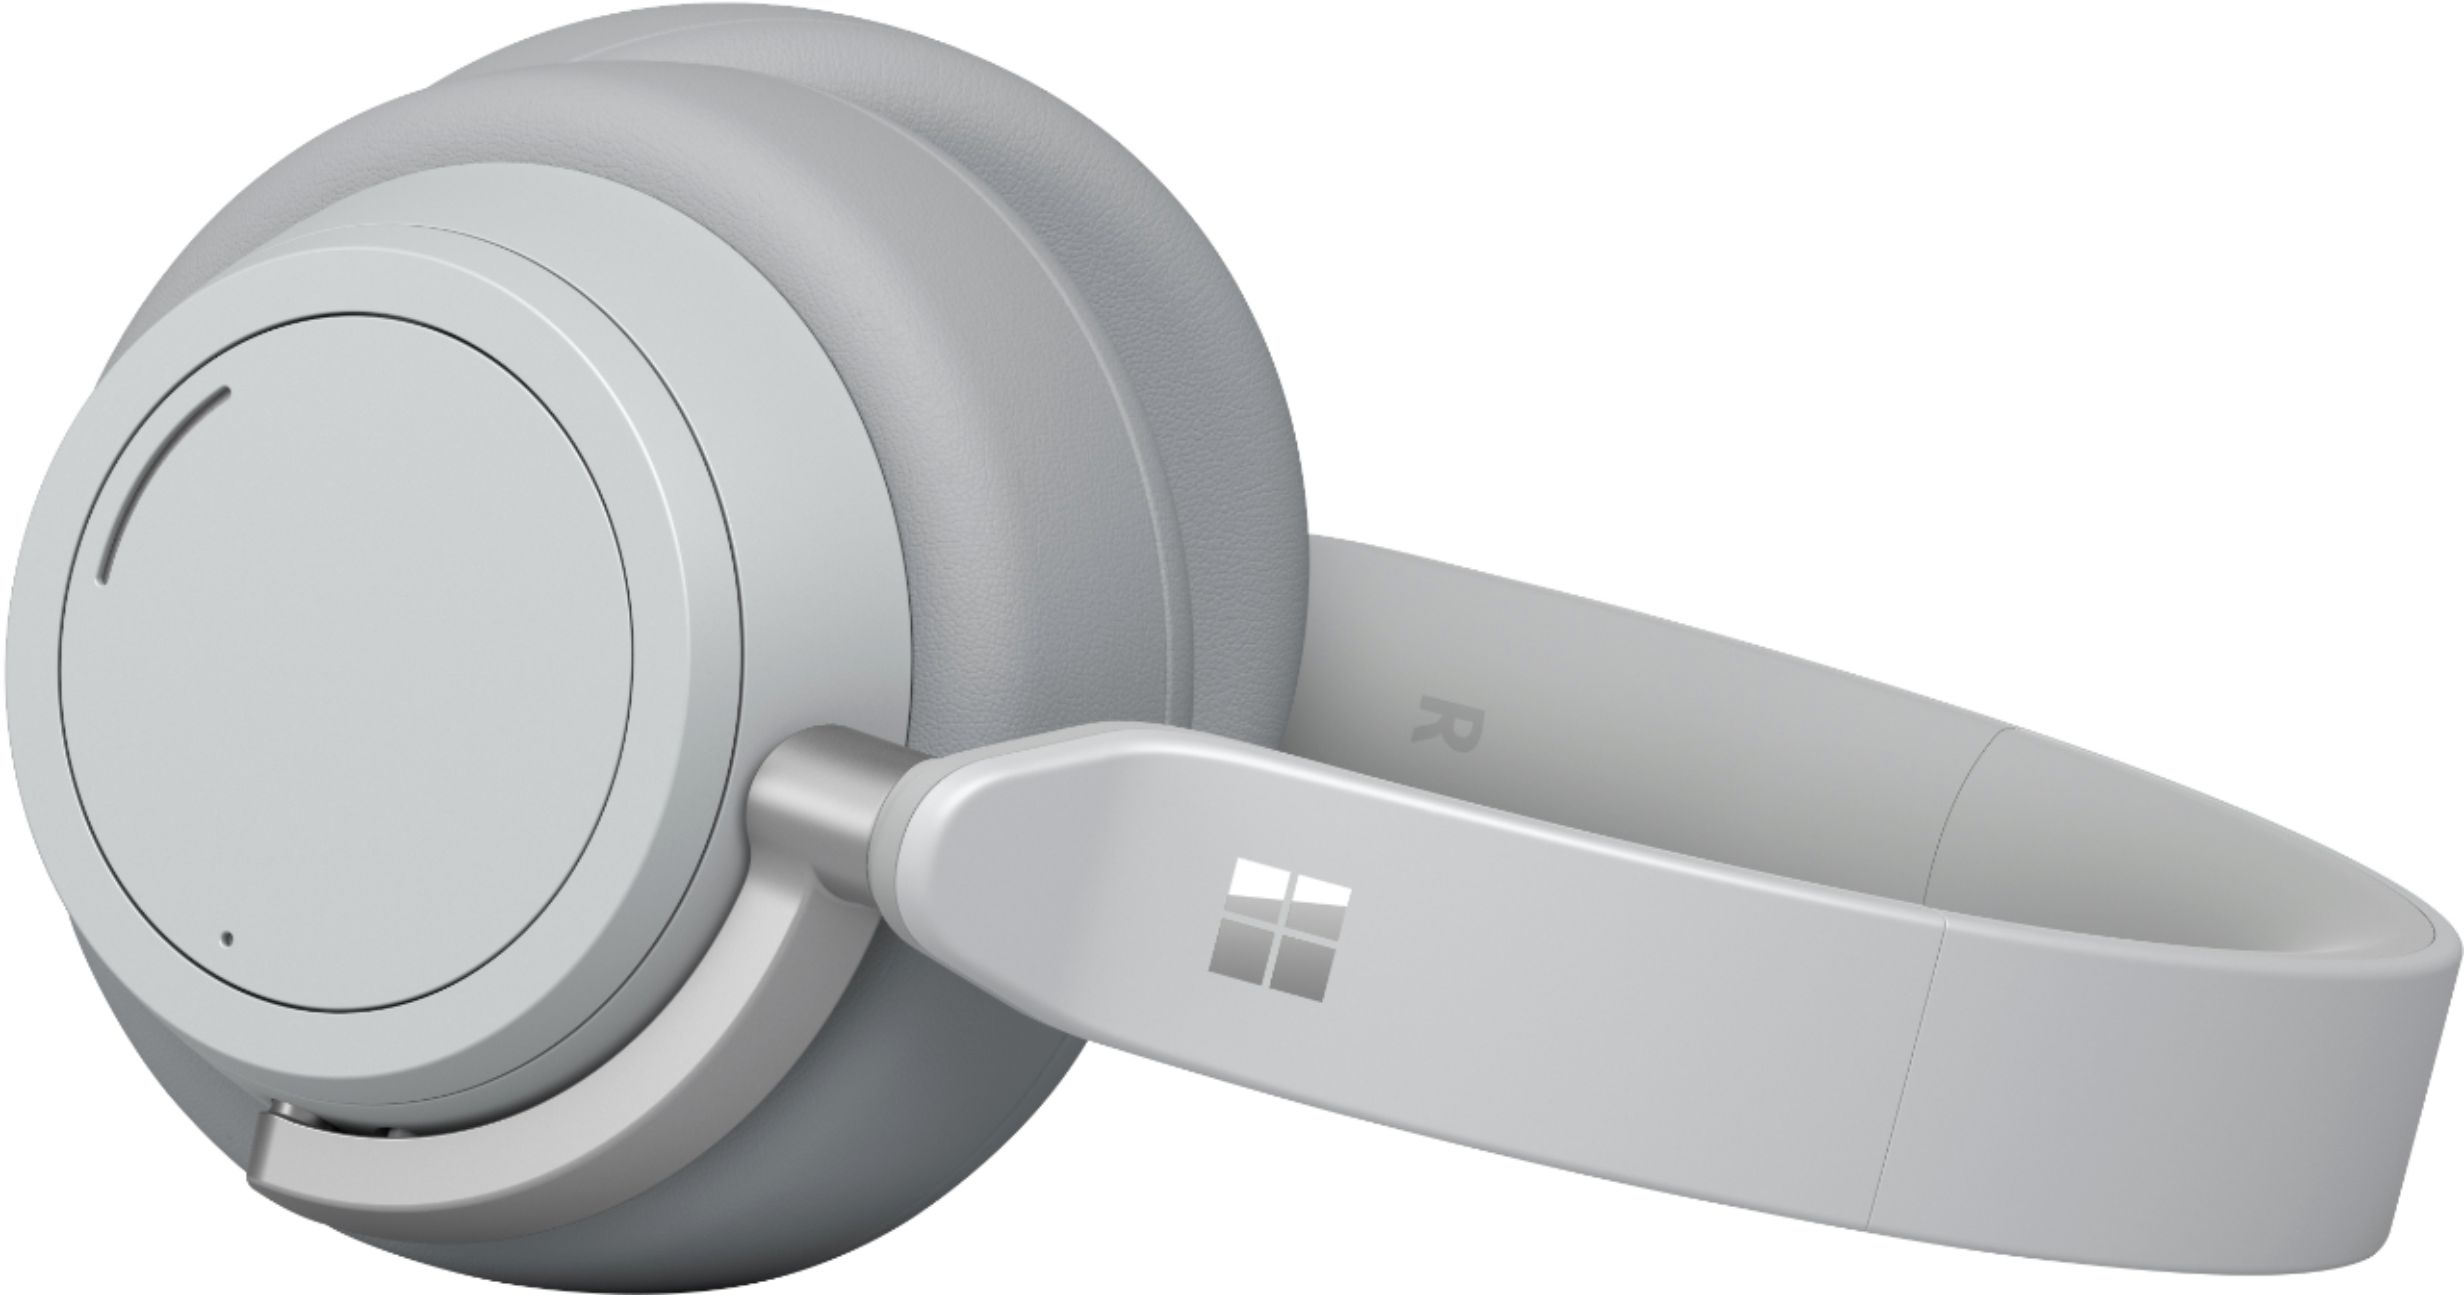 Best Buy: Microsoft Surface Headphones 2 Wireless Noise Cancelling